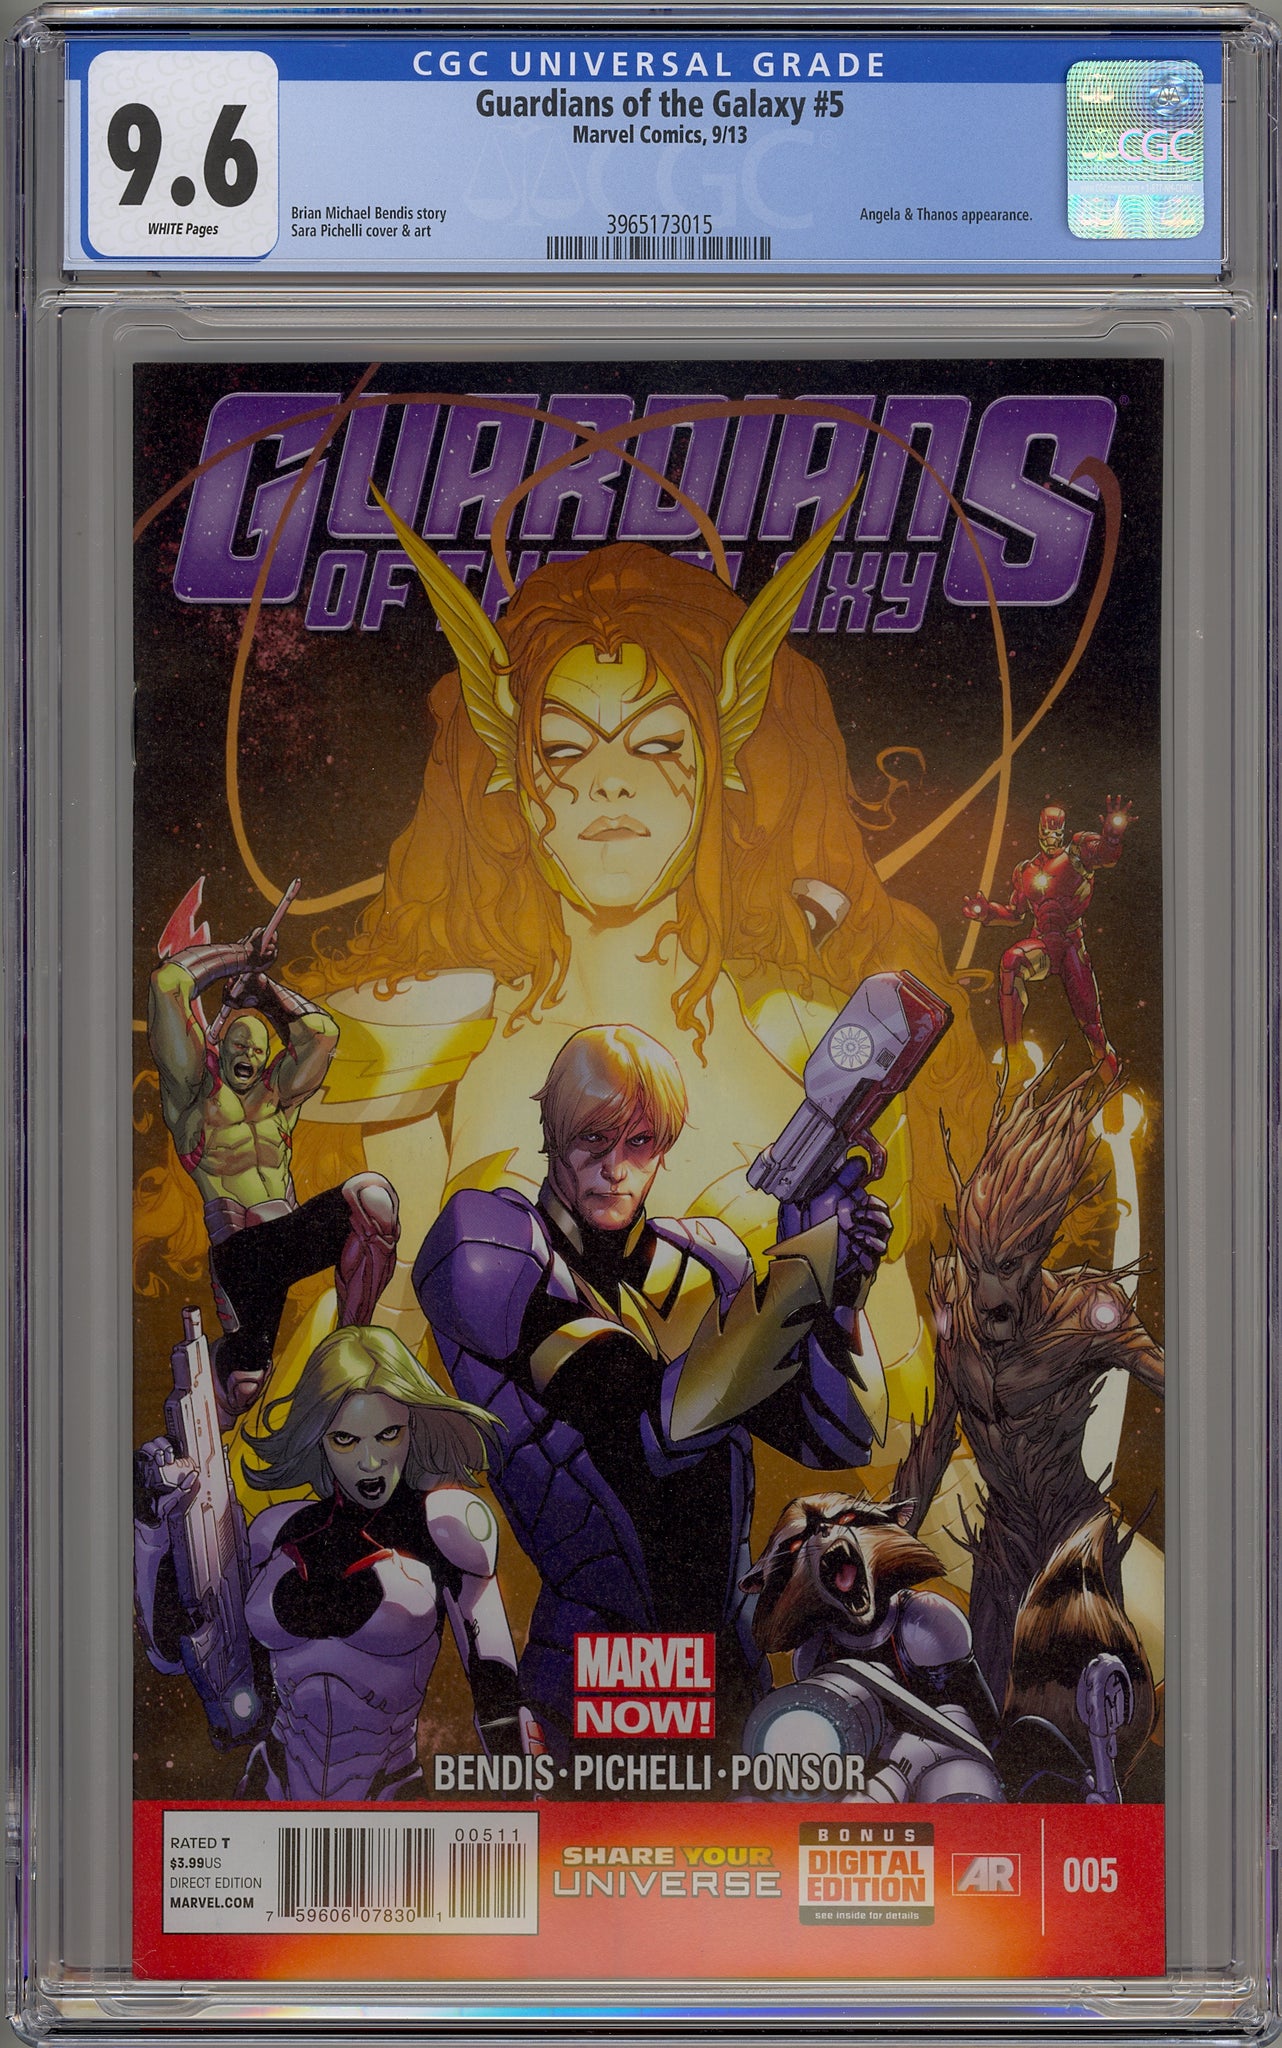 Guardians of the Galaxy #5 (2013) Angela